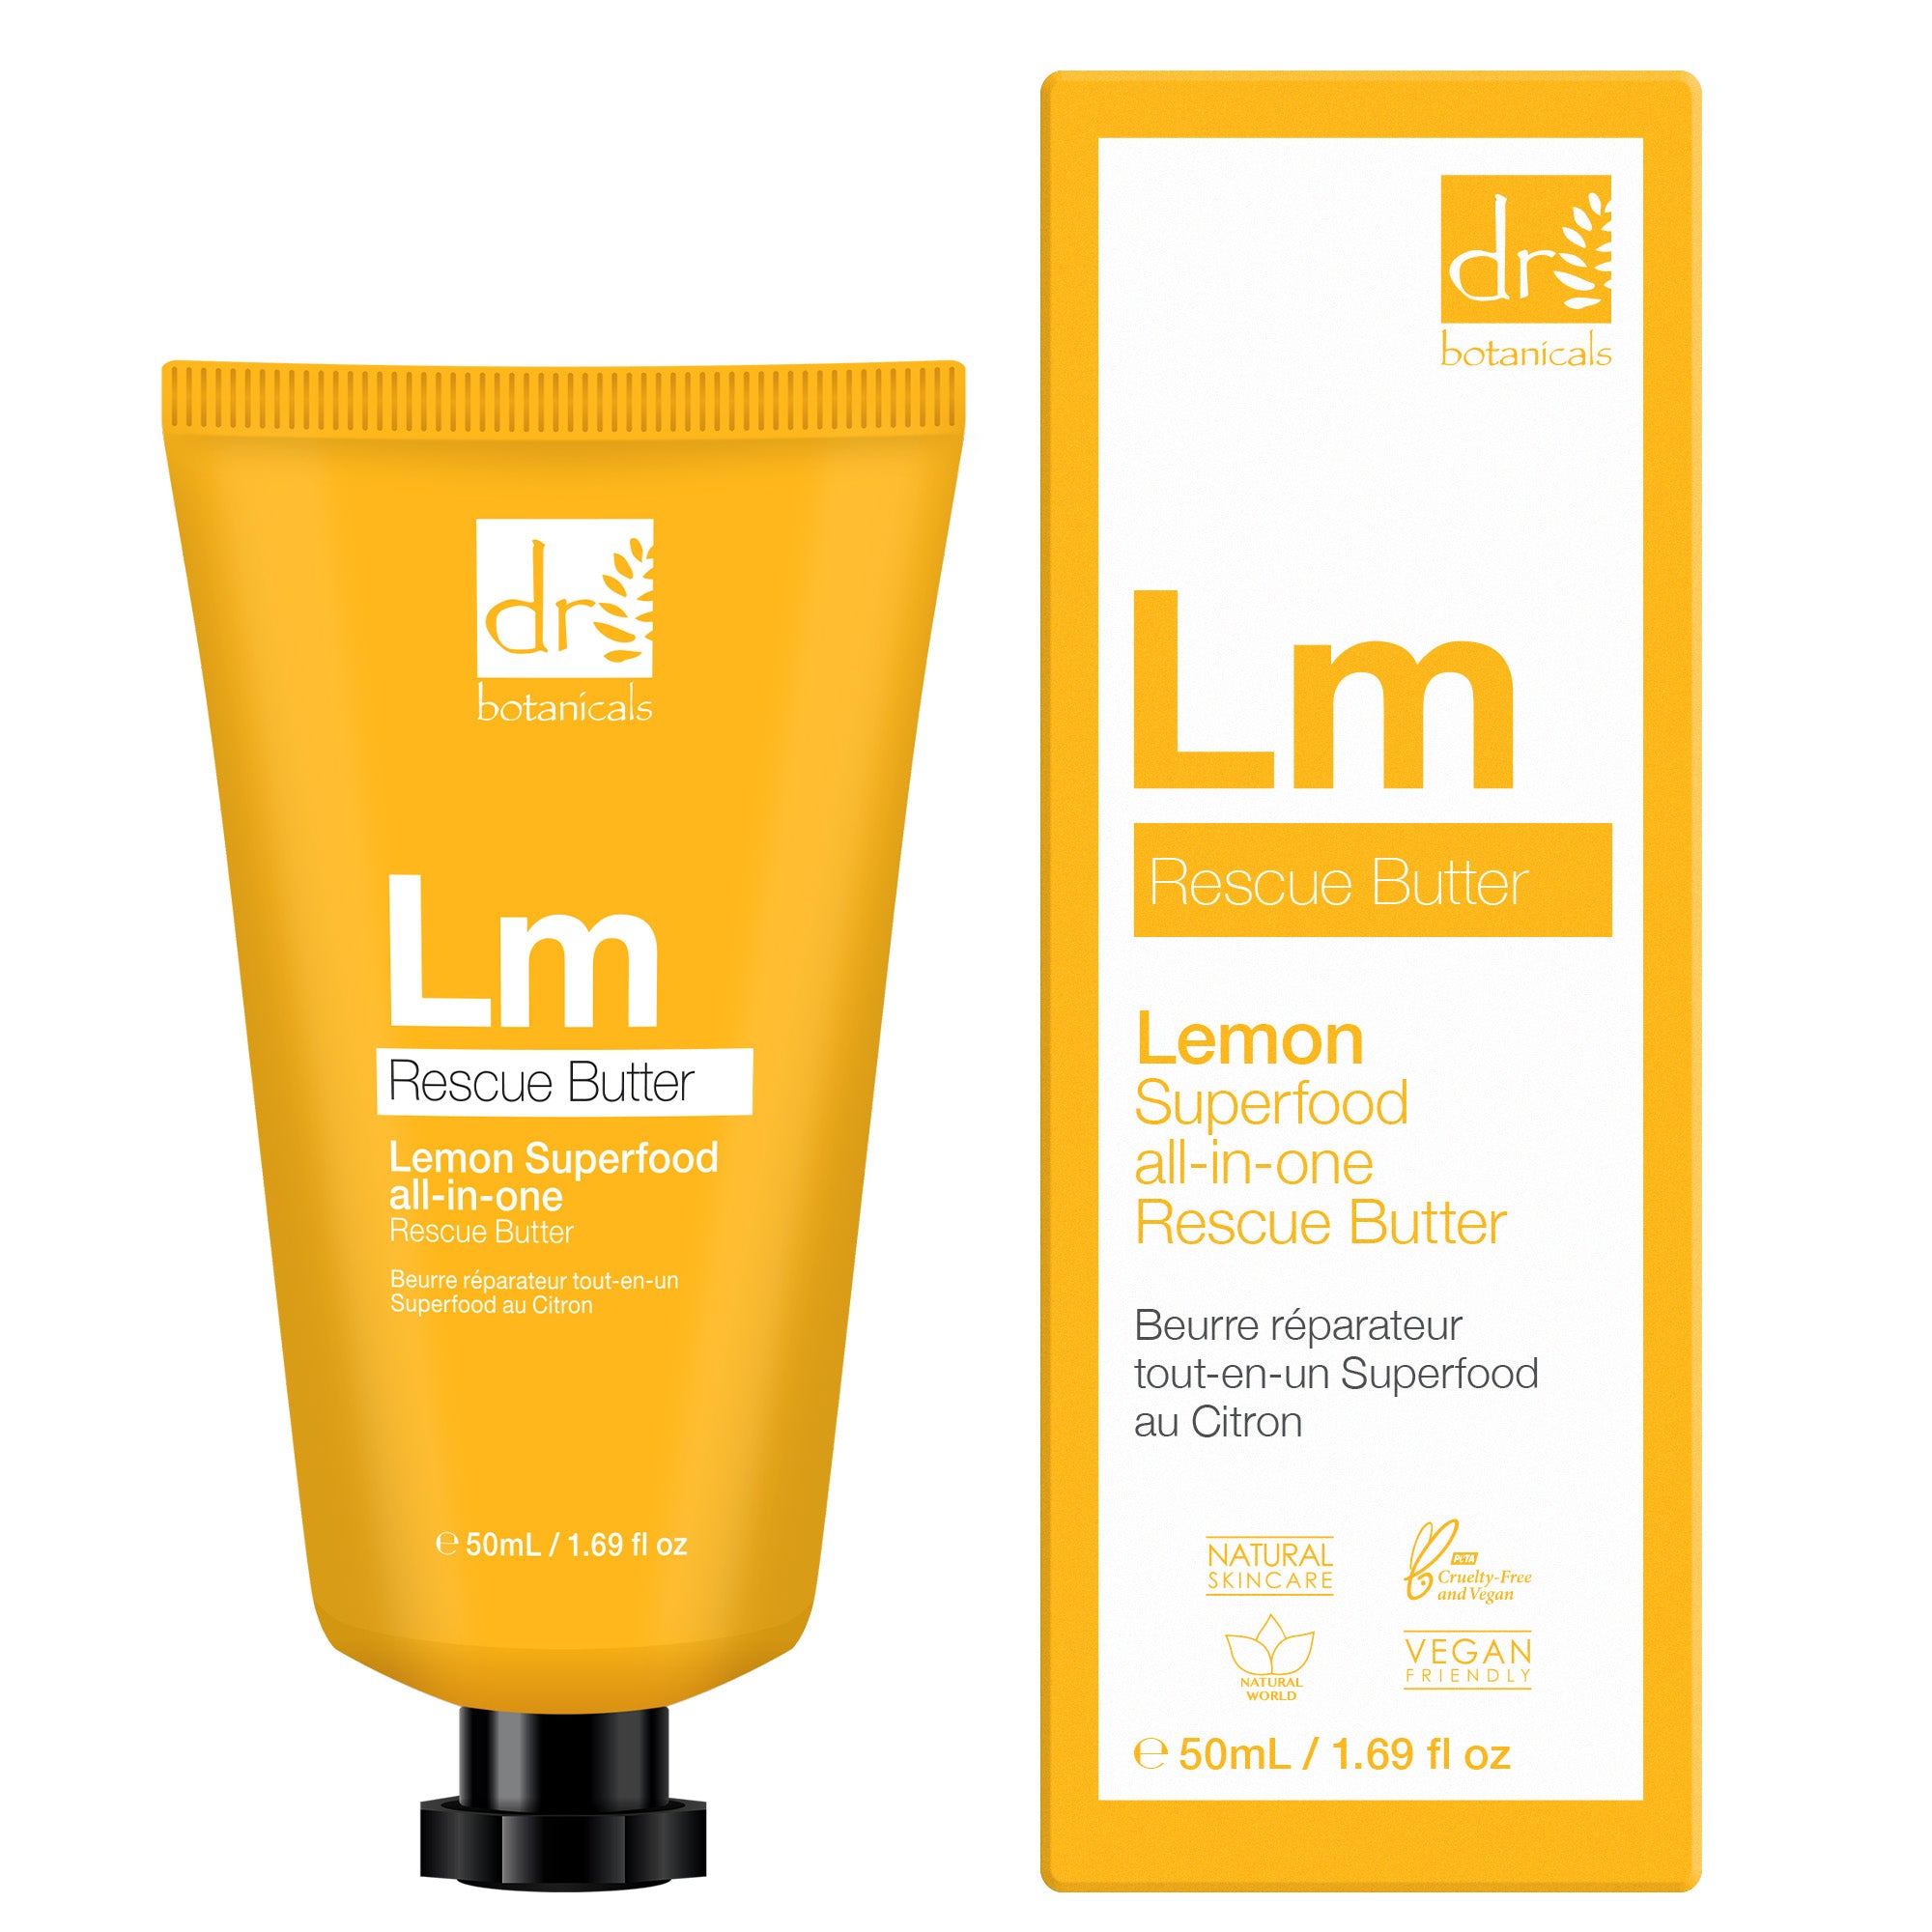 Dr Botanicals Lemon Superfood All-In-One Rescue Butter 50ml